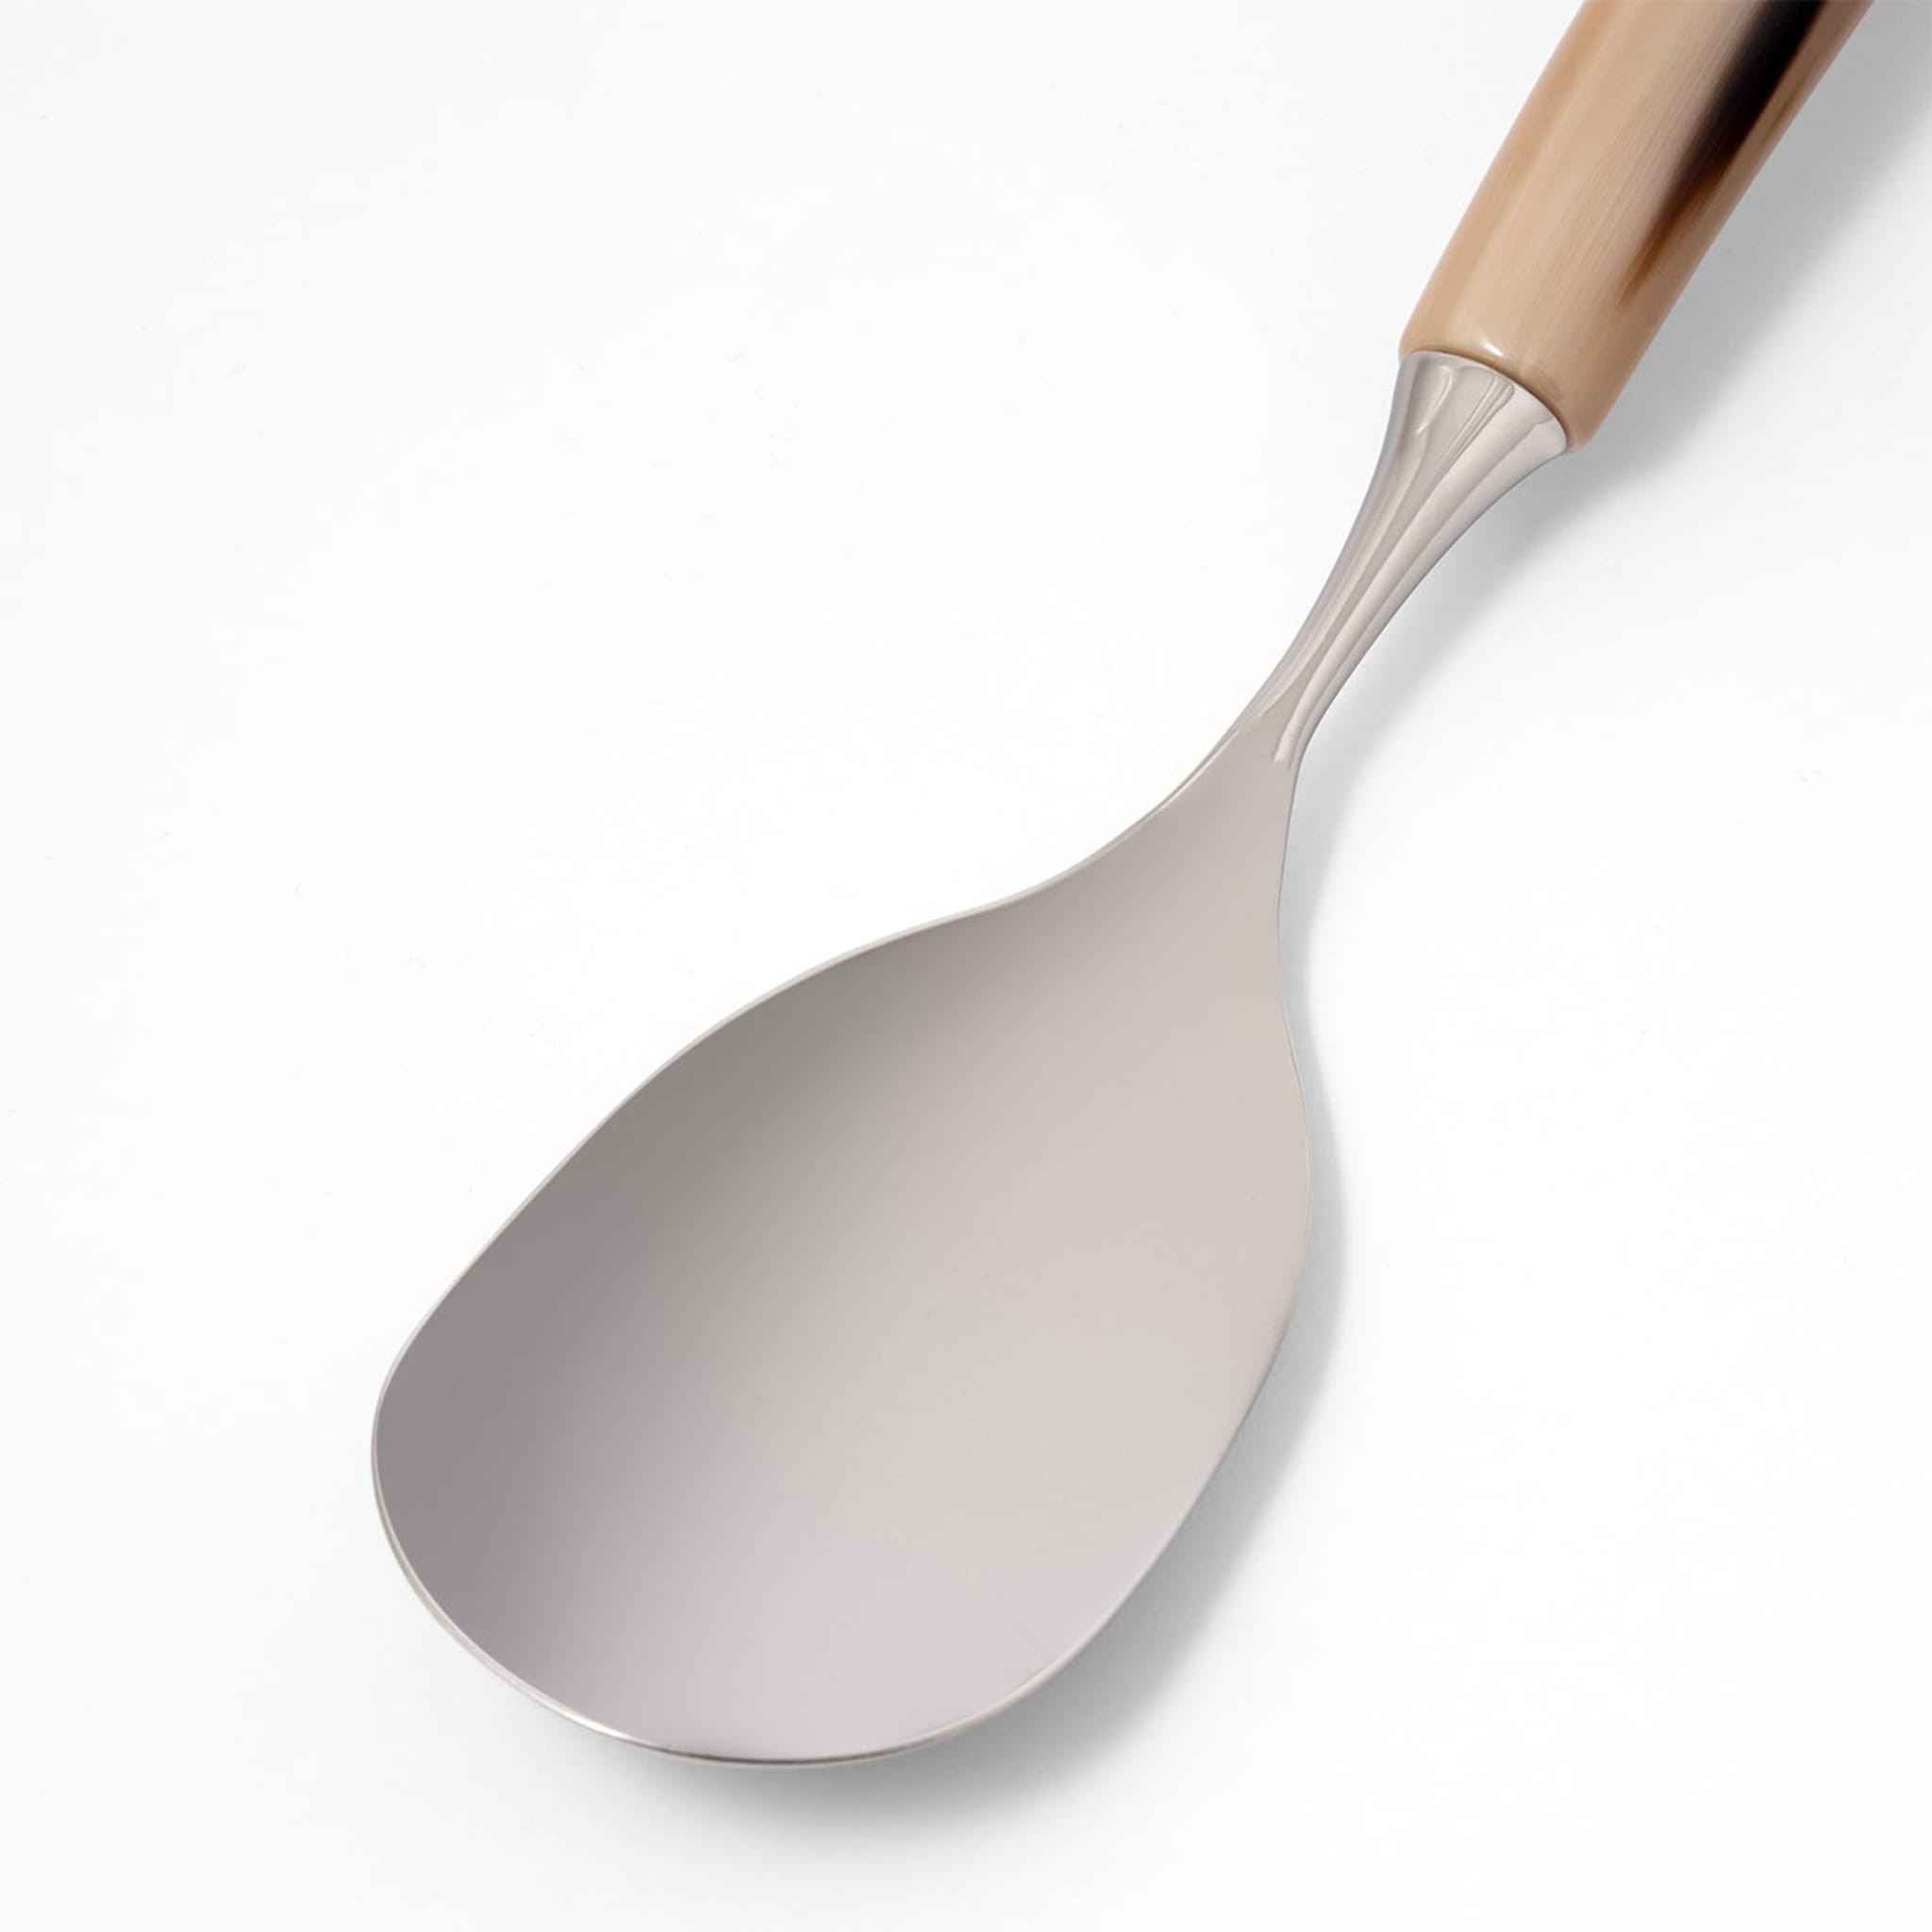 Risotto Spoon in Natural Horn - Alternative view 2